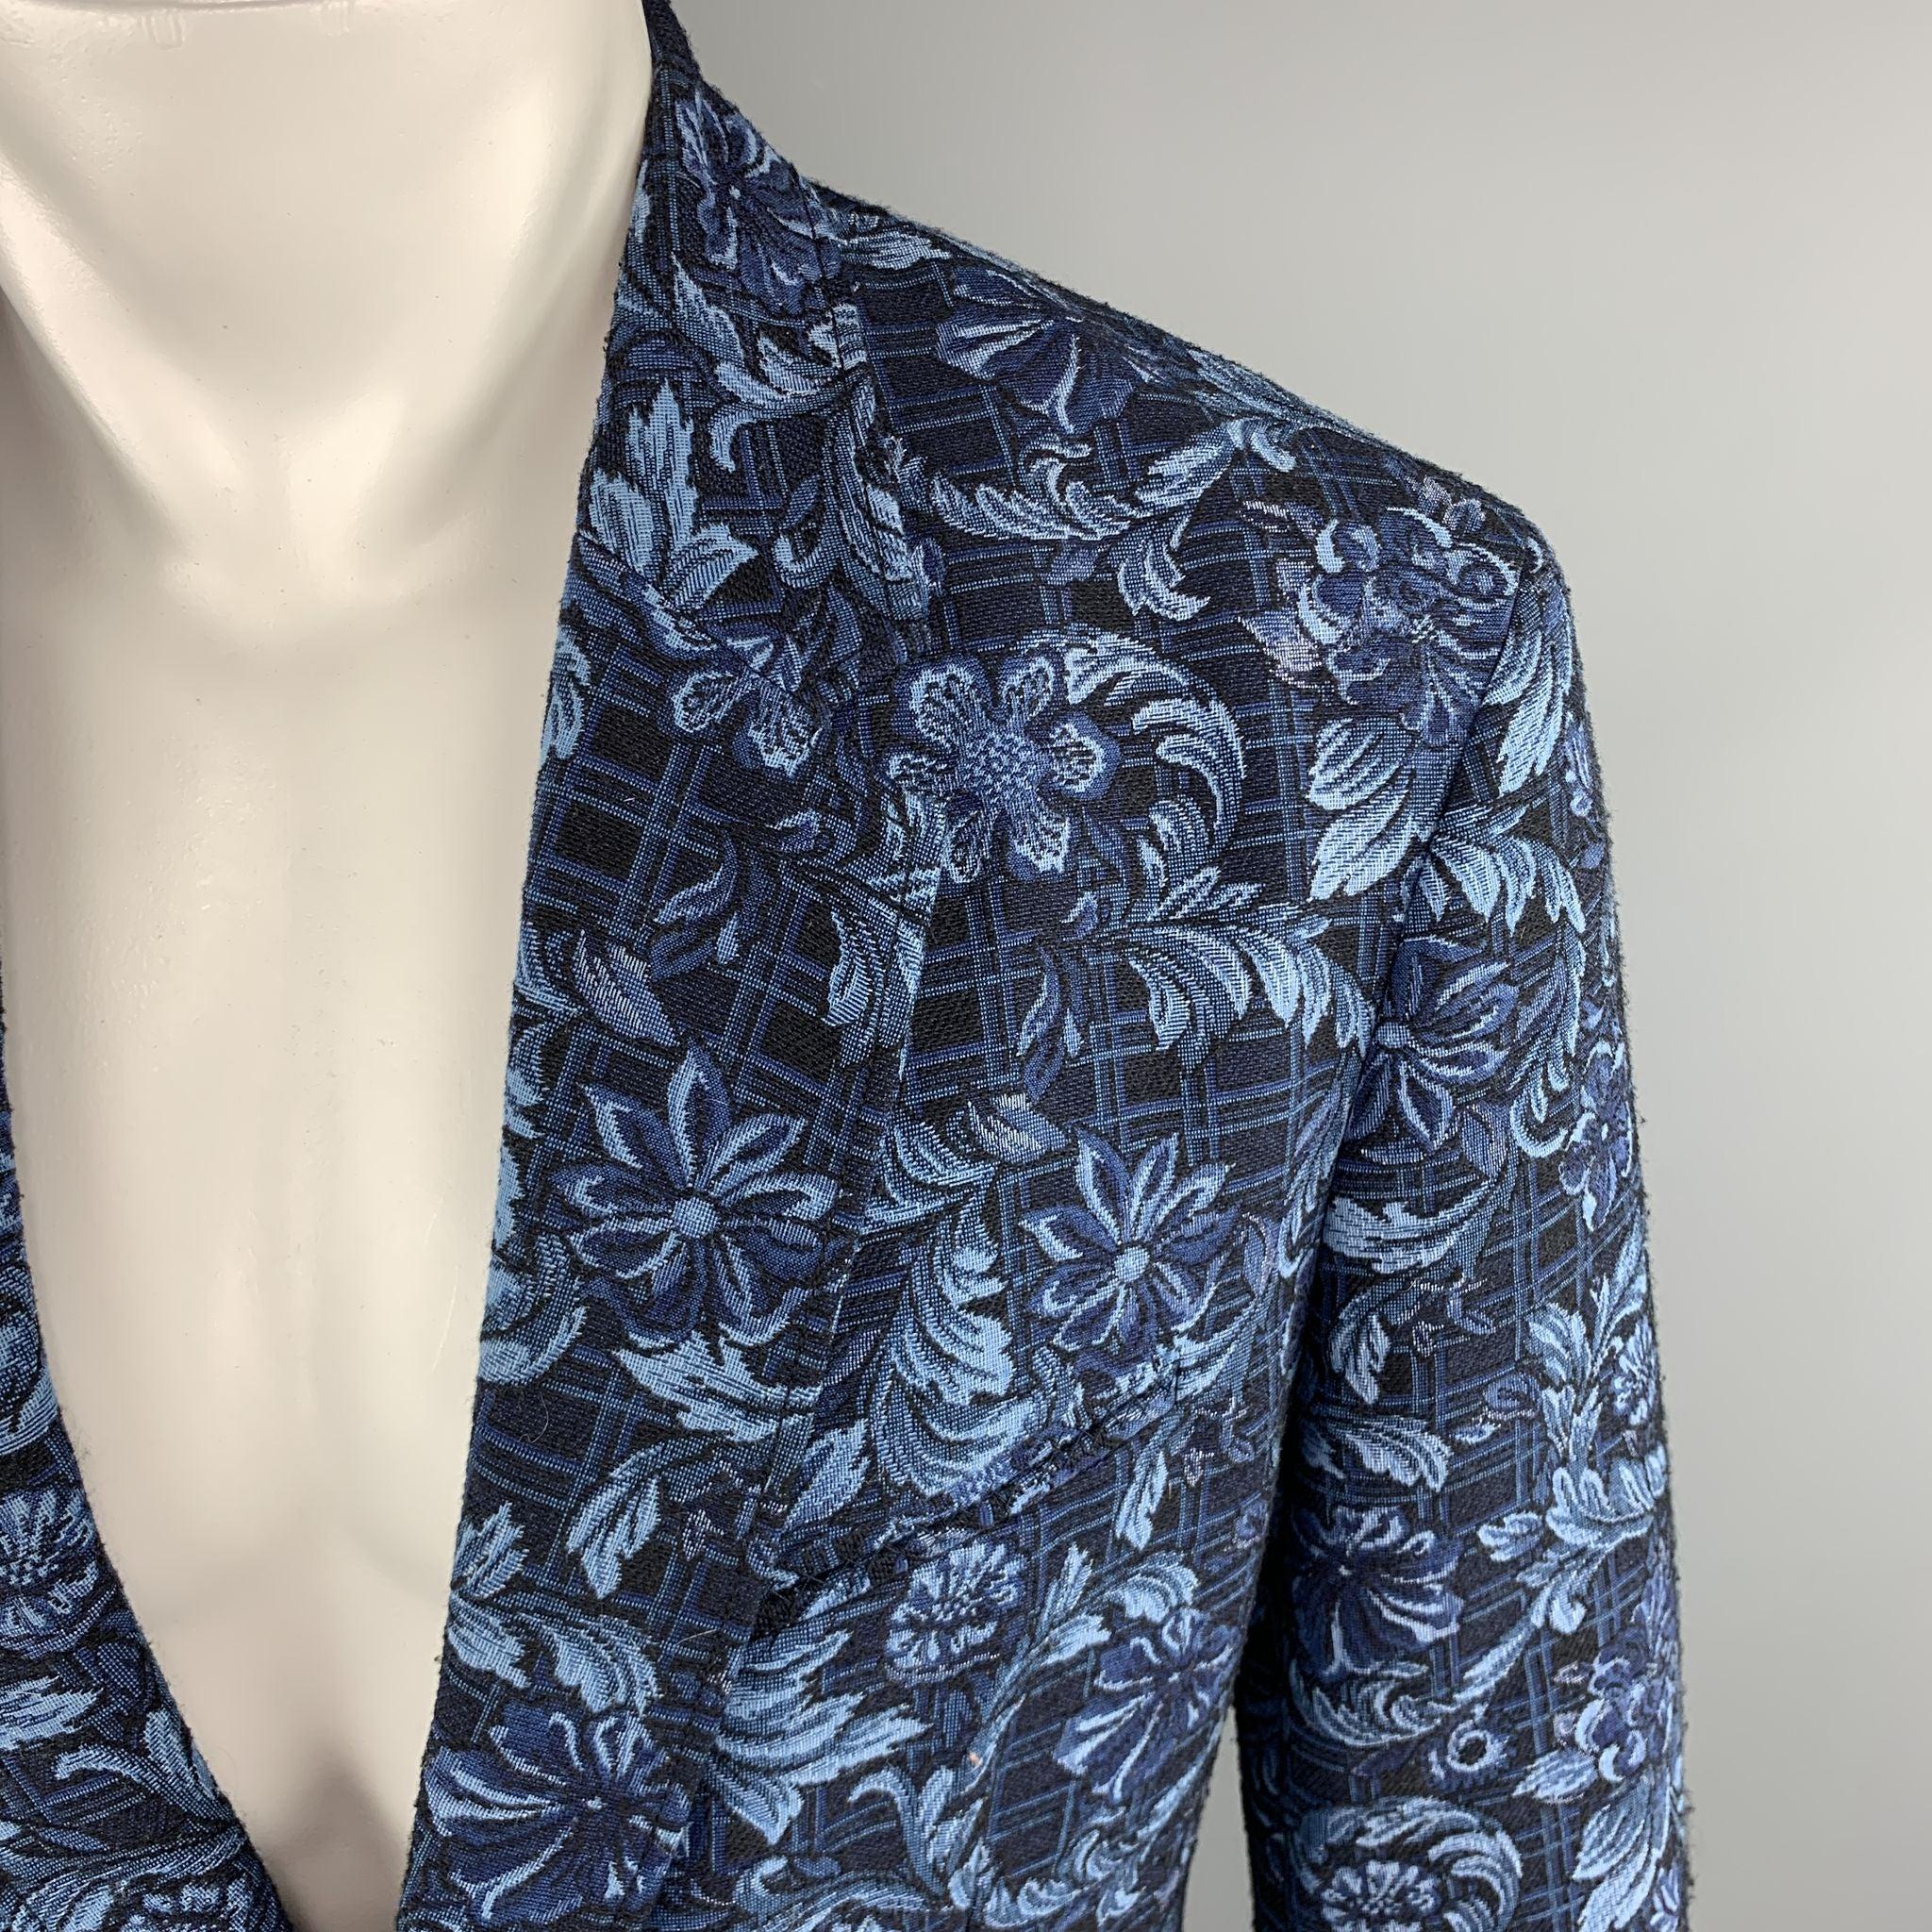 3.1 PHILLIP LIM Sport Coat comes in navy and blue tones in a floral jacquard viscose blend material, with a notch lapel, slit and flap pockets, two buttons at closure, single breasted, buttoned cuffs, and a single vent at back.Excellent
Pre-Owned